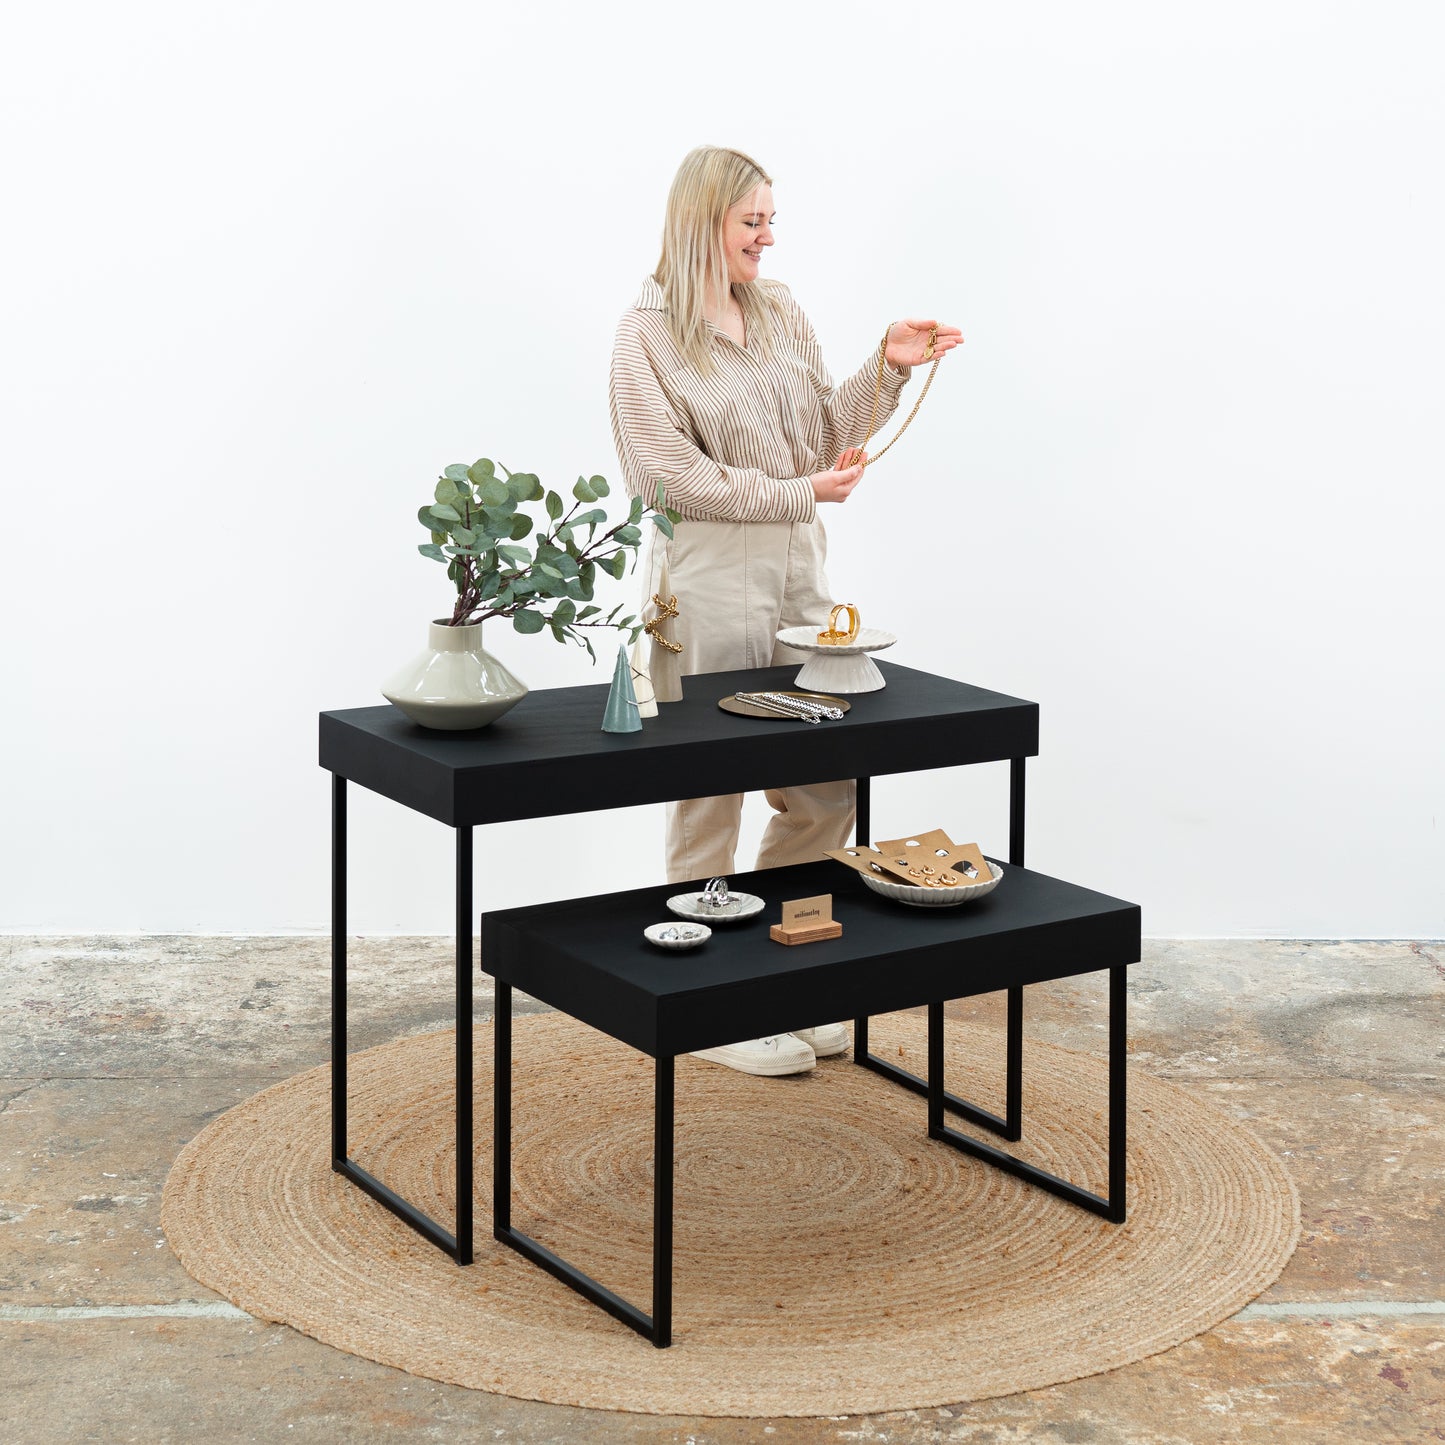 2 display tables SC-05-BL-BL, foldable nesting tables